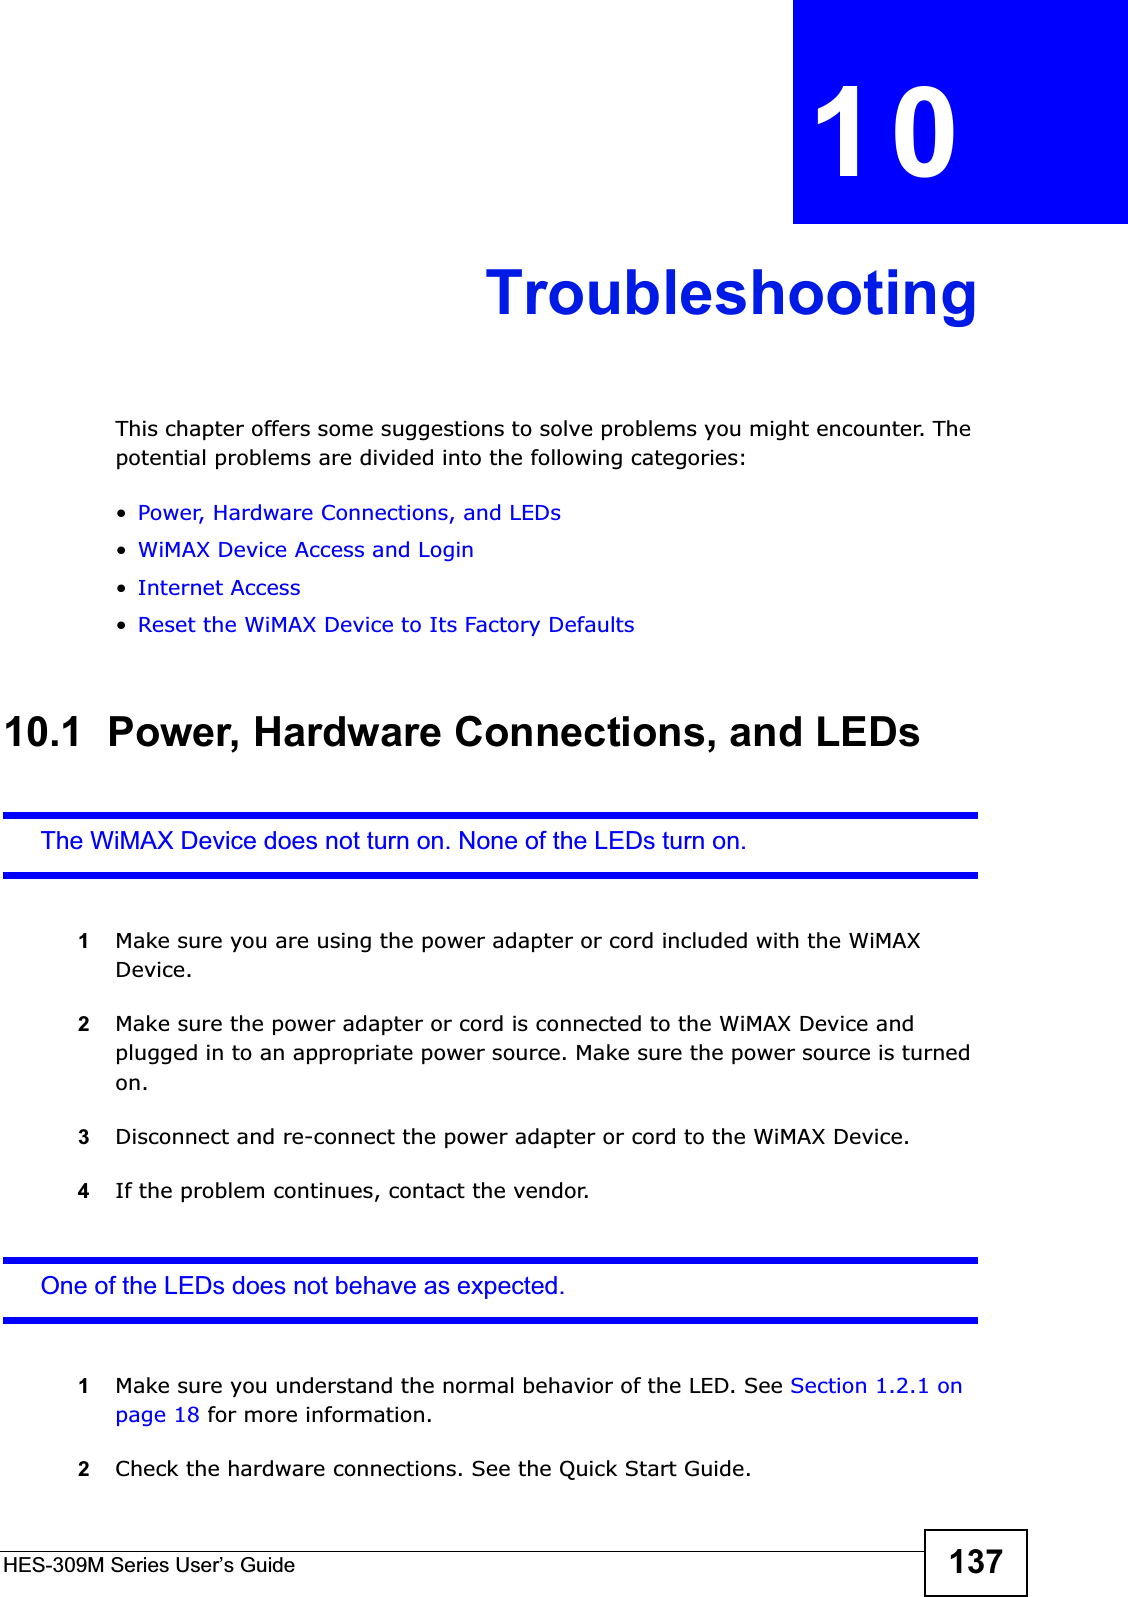 HES-309M Series User’s Guide 137CHAPTER 10TroubleshootingThis chapter offers some suggestions to solve problems you might encounter. The potential problems are divided into the following categories:•Power, Hardware Connections, and LEDs•WiMAX Device Access and Login•Internet Access•Reset the WiMAX Device to Its Factory Defaults10.1  Power, Hardware Connections, and LEDsThe WiMAX Device does not turn on. None of the LEDs turn on.1Make sure you are using the power adapter or cord included with the WiMAX Device.2Make sure the power adapter or cord is connected to the WiMAX Device and plugged in to an appropriate power source. Make sure the power source is turned on.3Disconnect and re-connect the power adapter or cord to the WiMAX Device.4If the problem continues, contact the vendor.One of the LEDs does not behave as expected.1Make sure you understand the normal behavior of the LED. See Section 1.2.1 on page 18 for more information.2Check the hardware connections. See the Quick Start Guide.